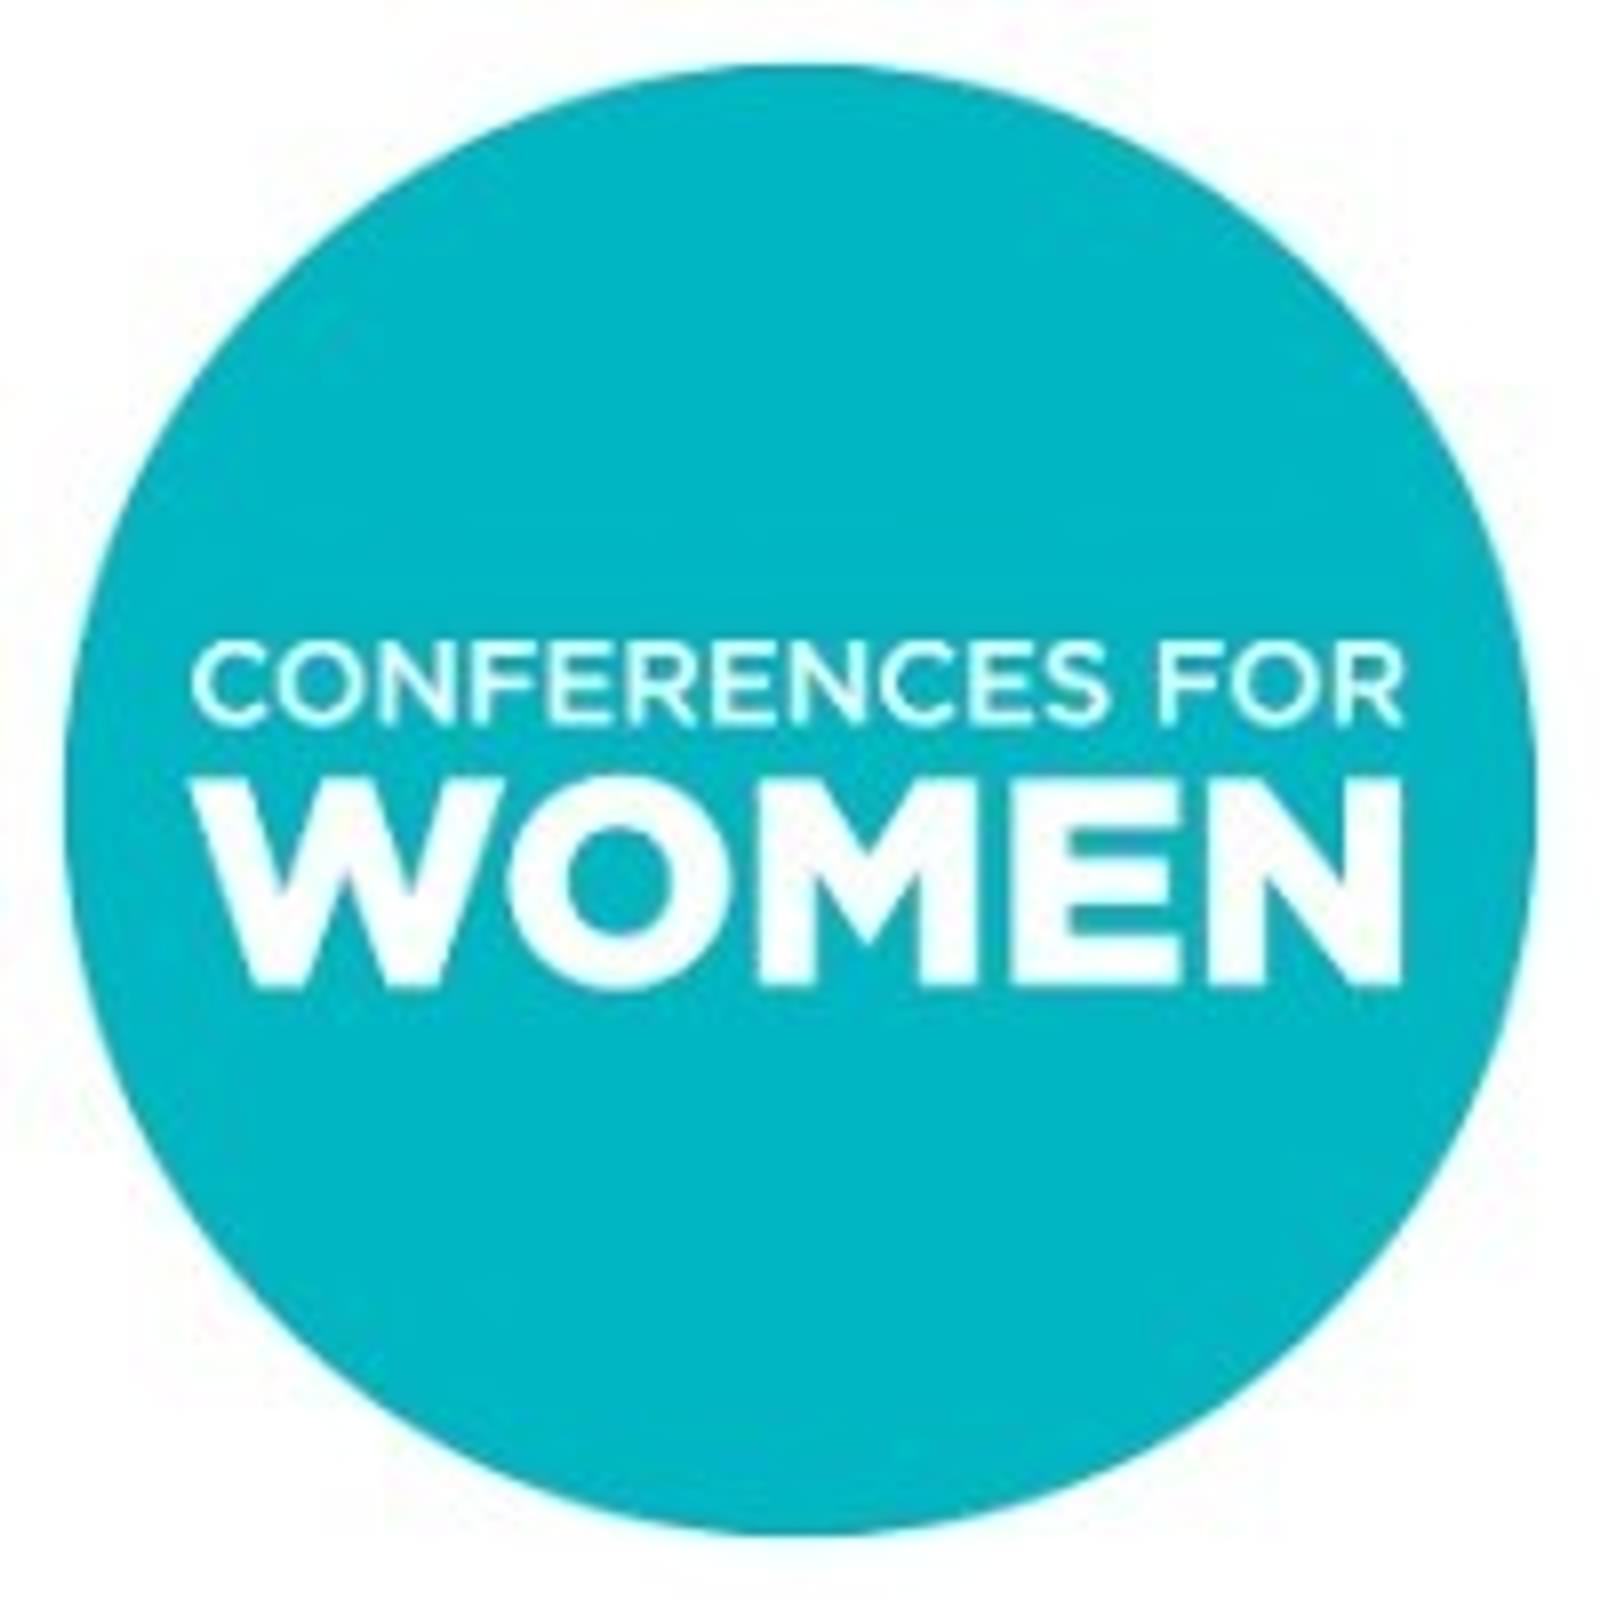 Conferences for Women logo